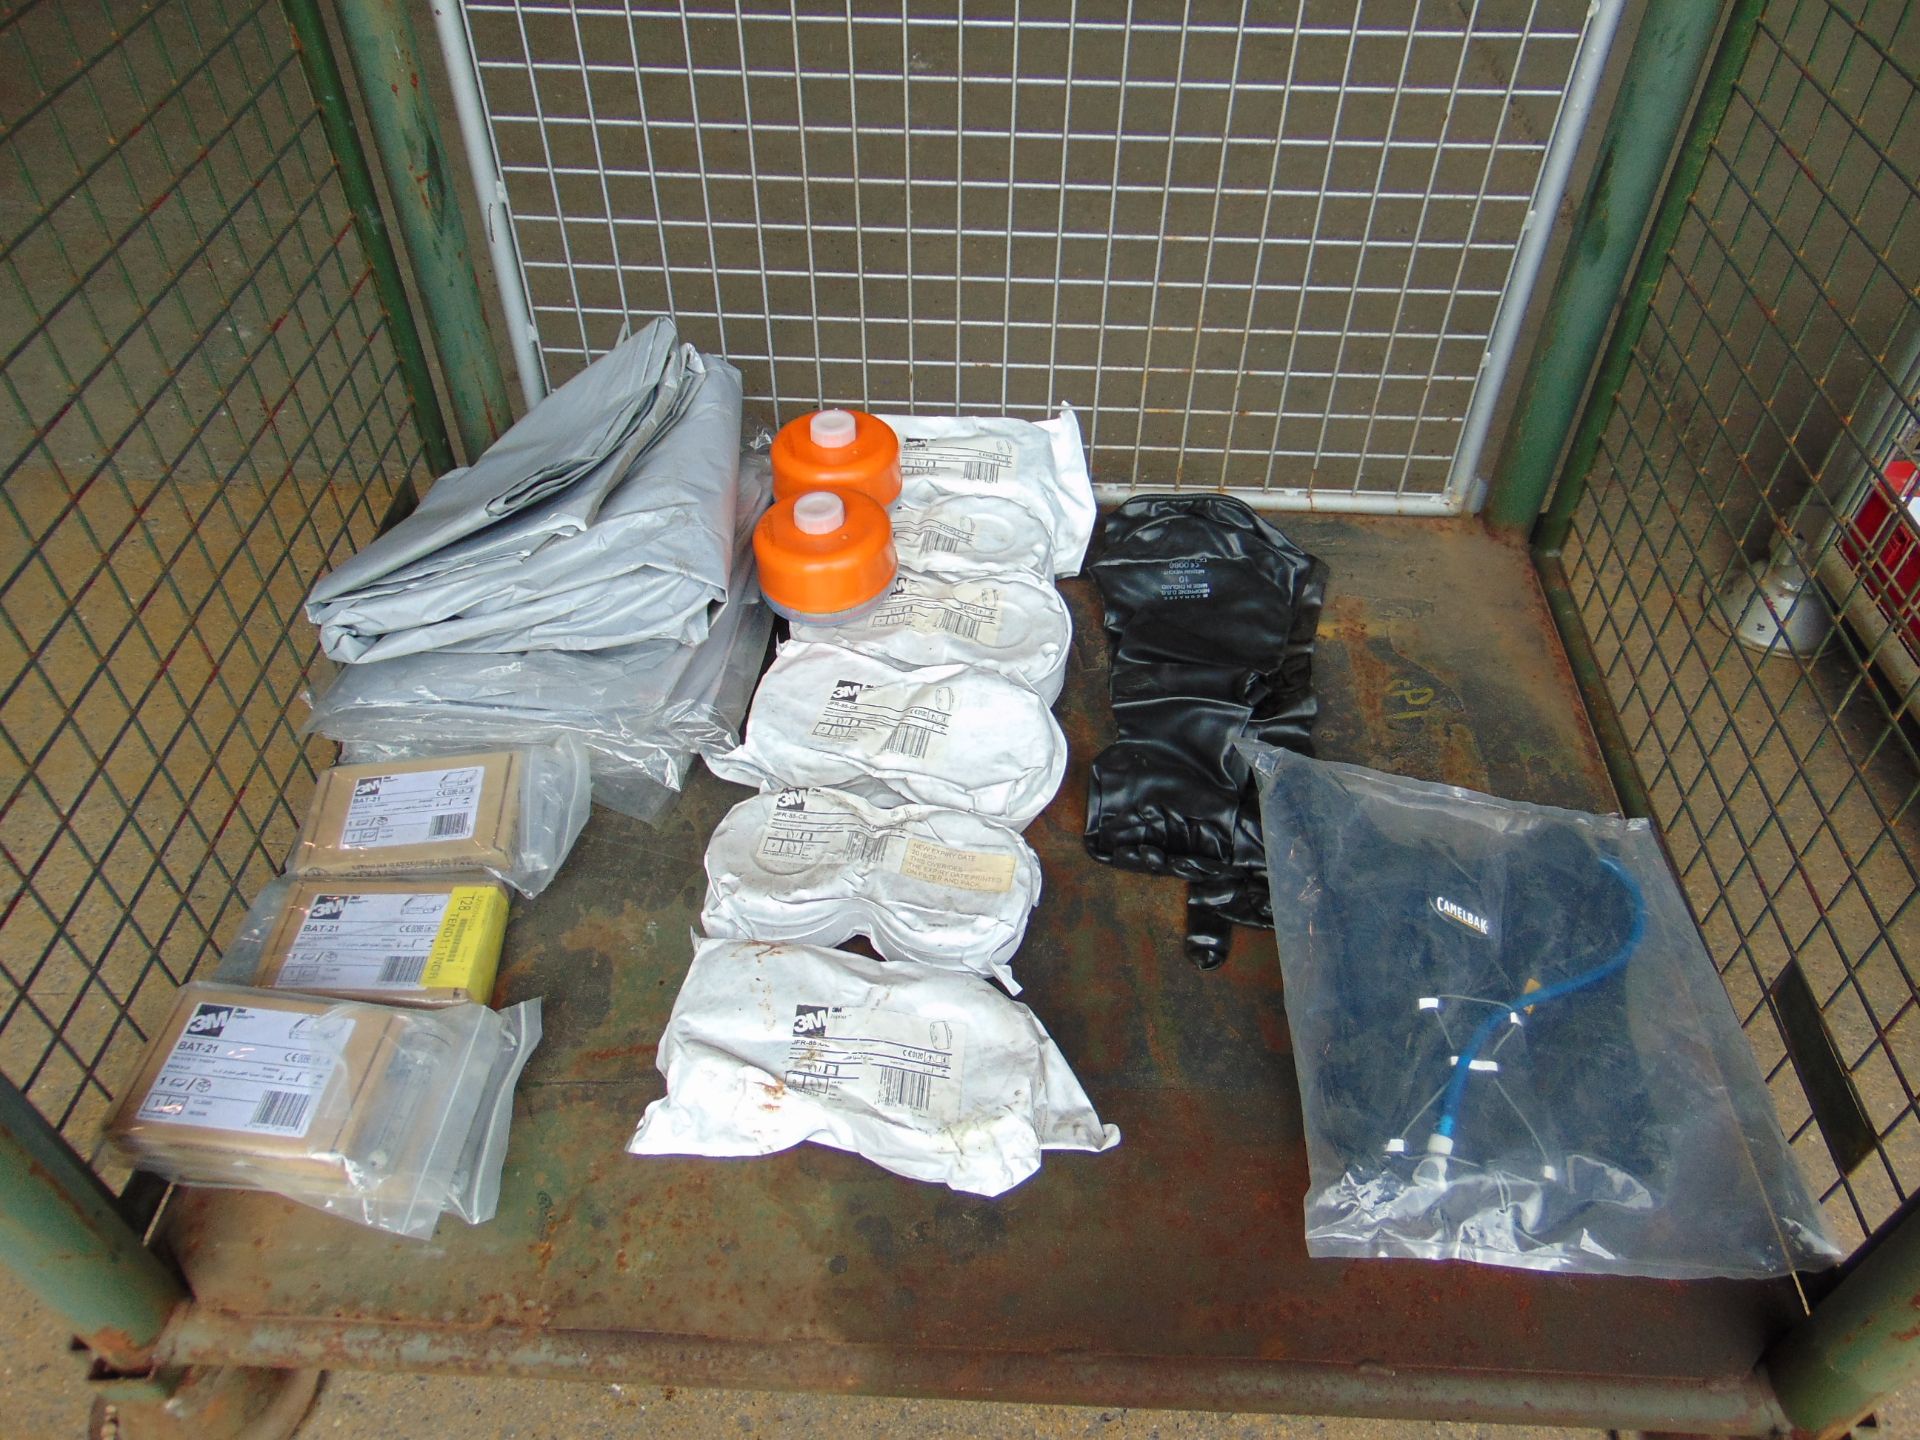 Stillage of 3M Filter Cartridges, Plastic Sheets, Camelback Personal Hydrator, HD Rubber Gloves etc.